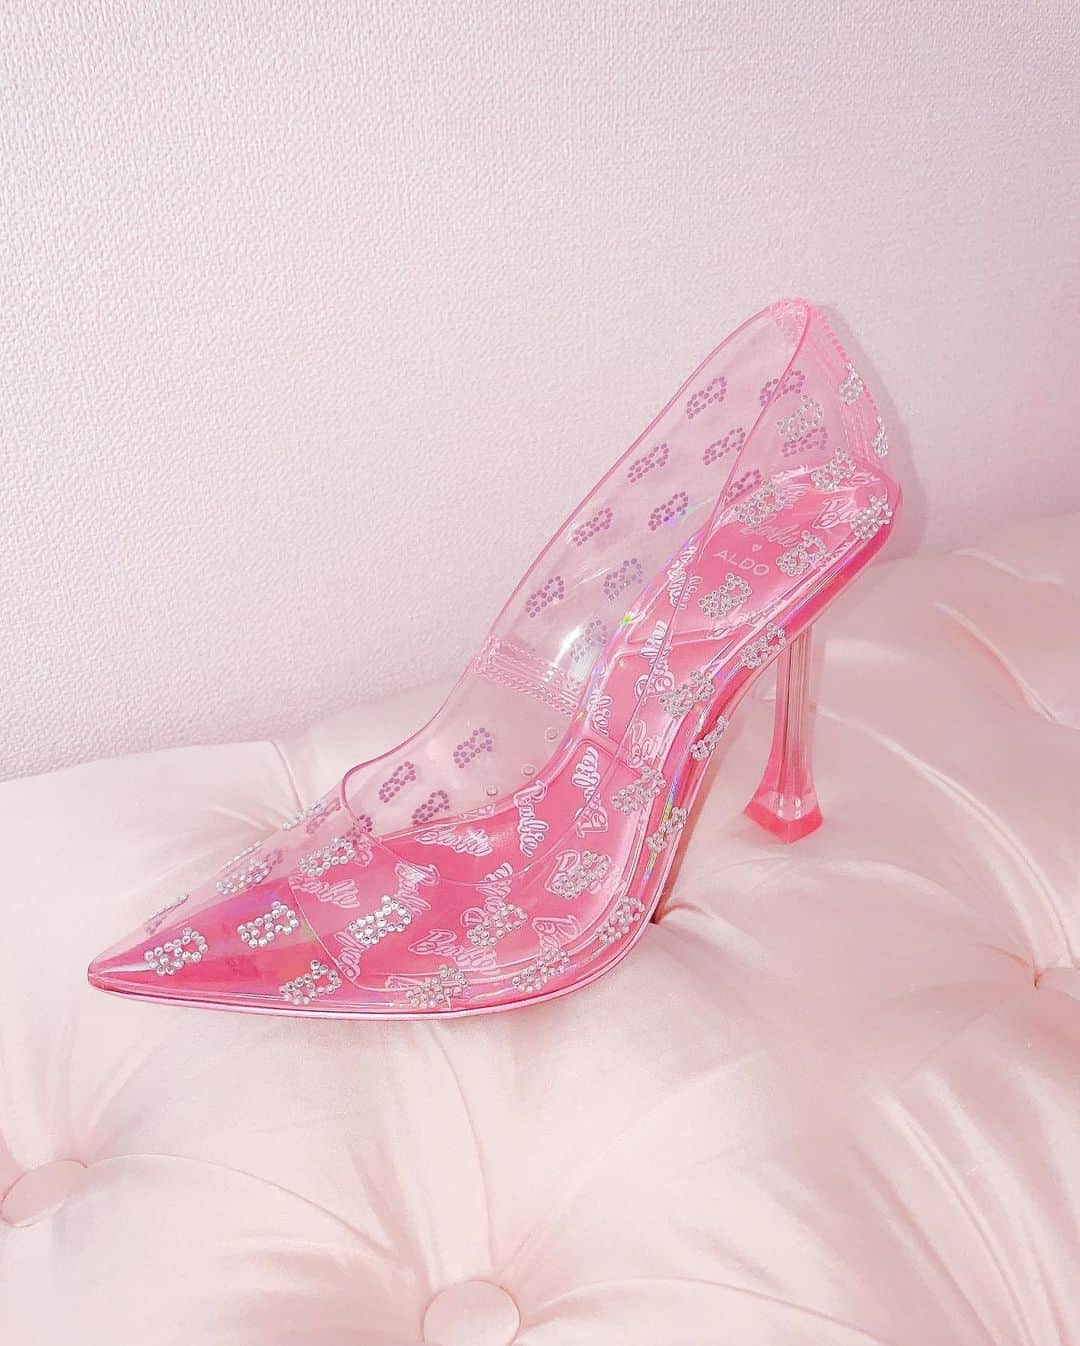 ALDO shoesのインスタグラム：「We can feel our heels already lifting 😌 the obsession is REAL over our iconic Barbietessy pumps designed with #ALDOPillowWalk padded insoles for ultra-comfy feels all day. Photo by @mmnjuuu #ALDOCrew #BarbiexALDO」